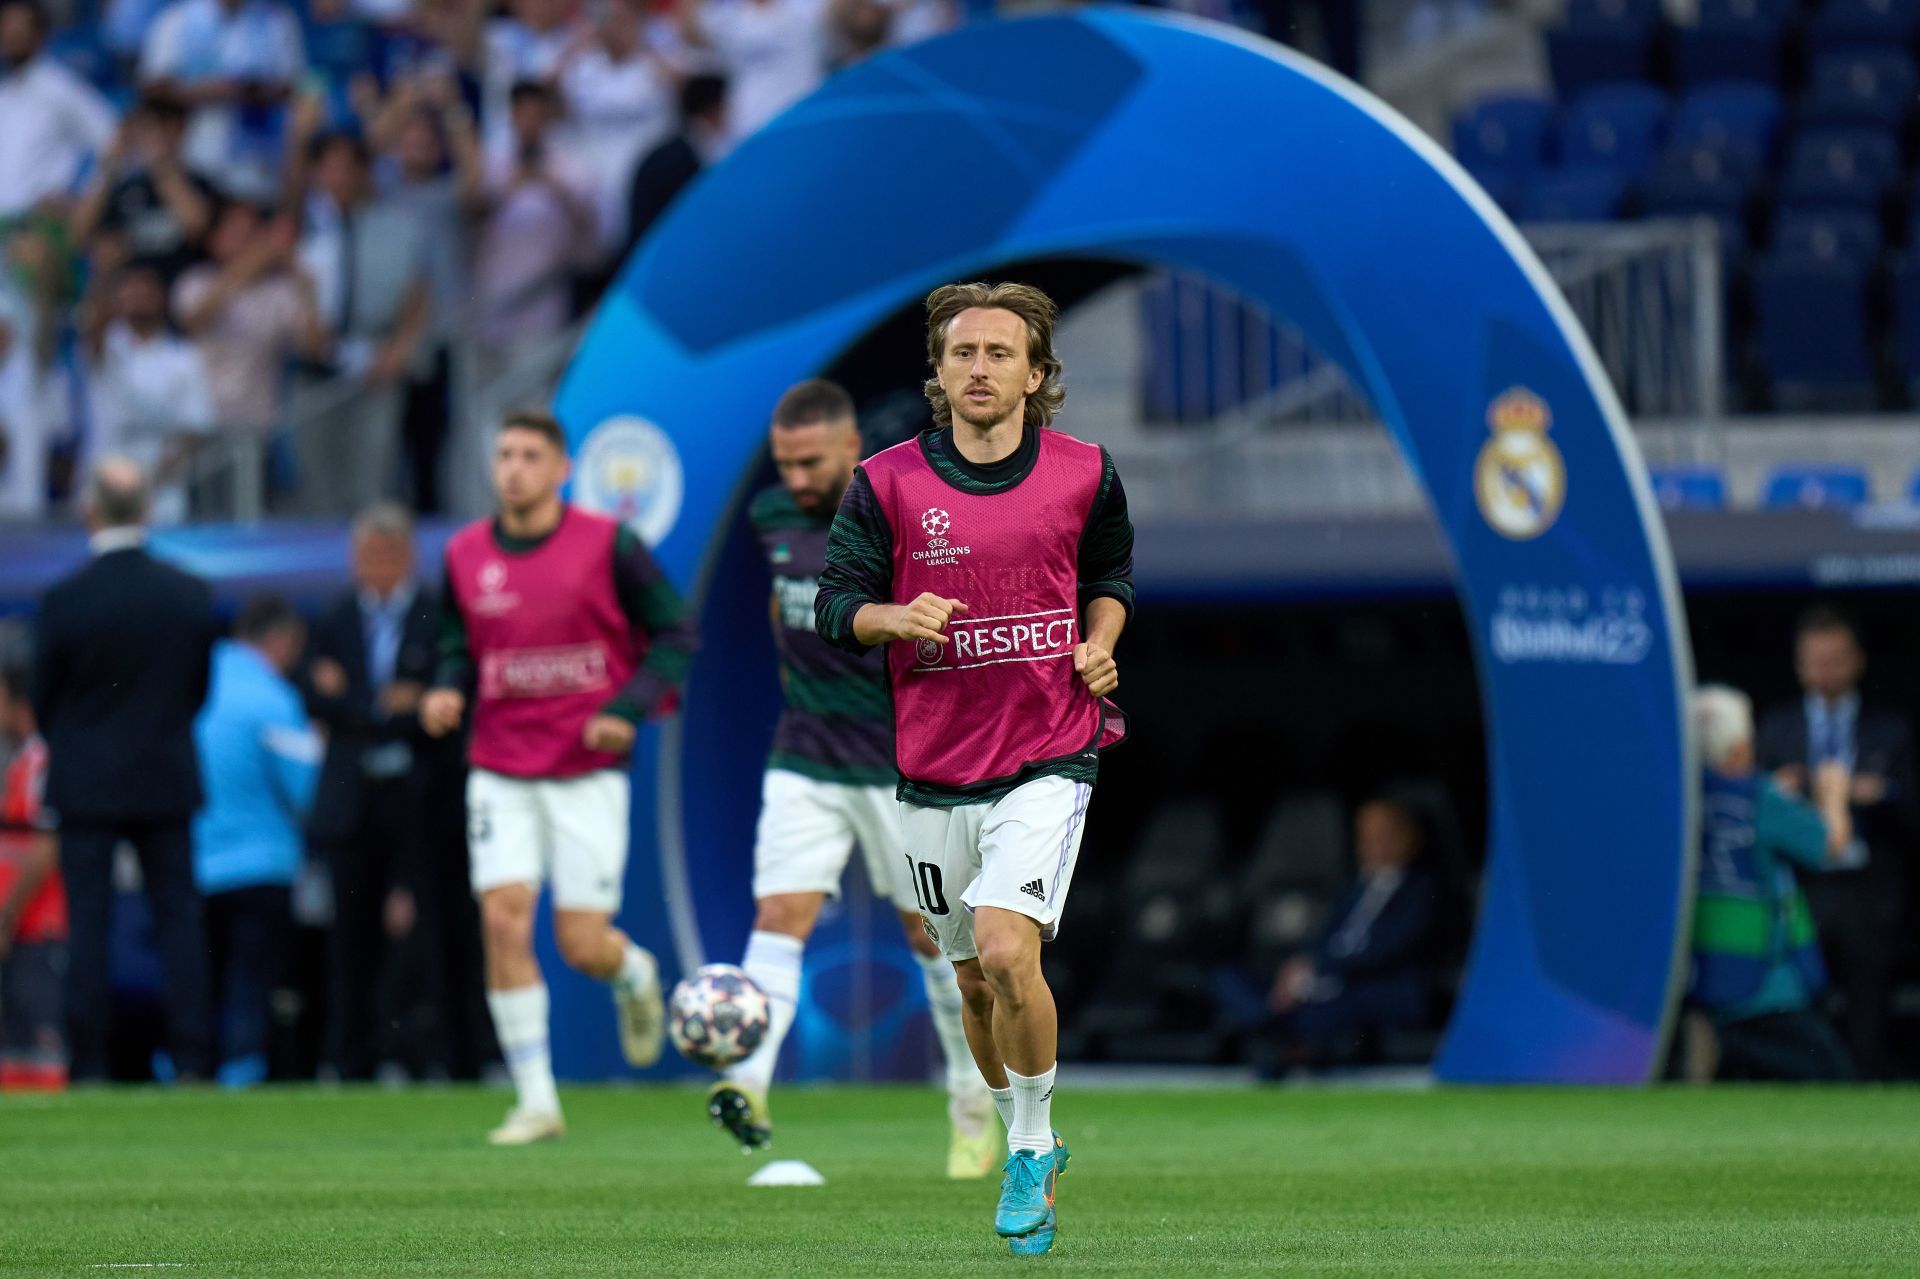 Luka Modric admitted that Manchester City deserved the win on Wednesday.